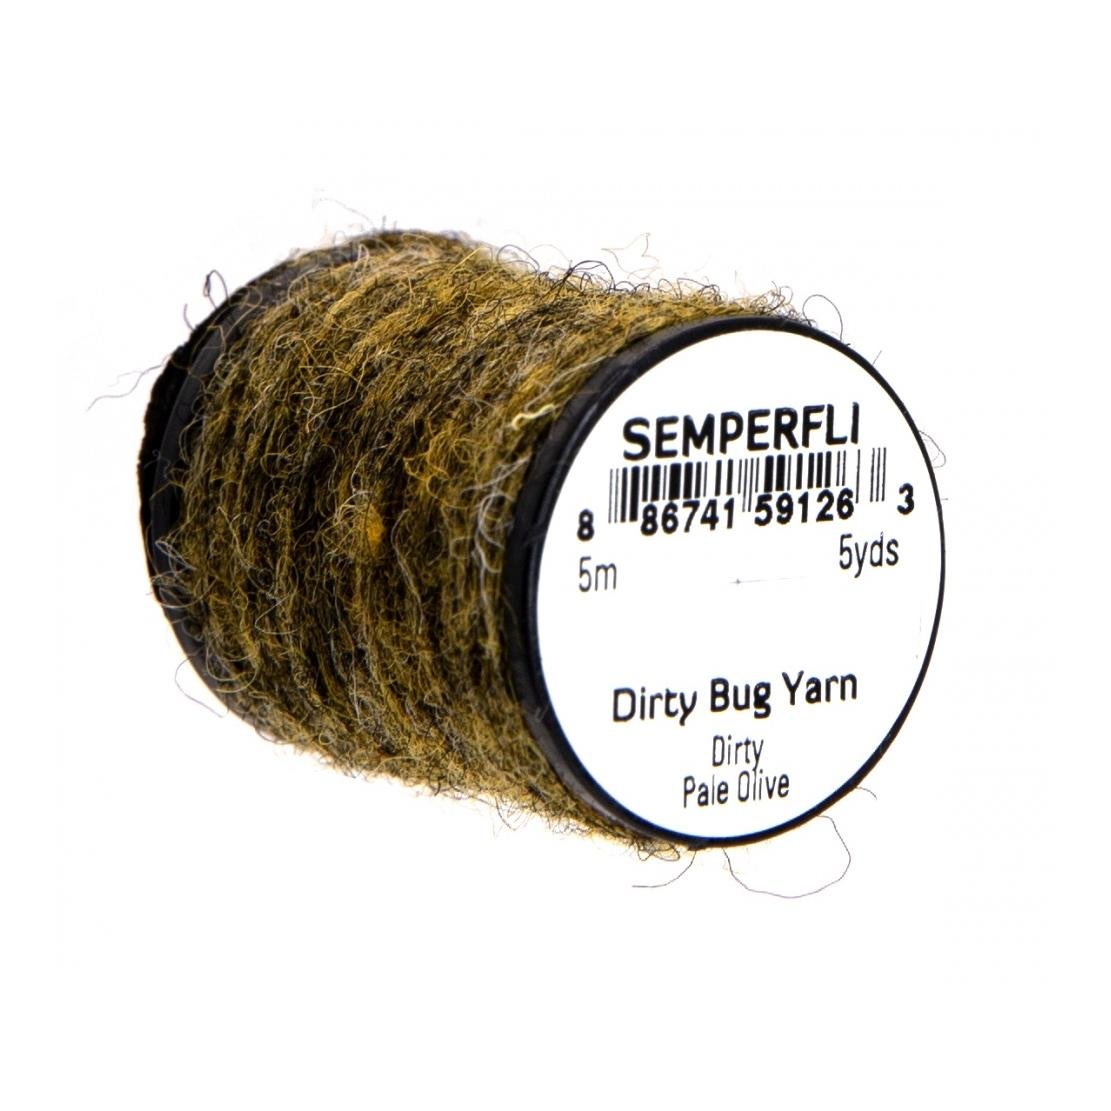 Image of Semperfli Dirty Bug Yarn Dirty Pale Olive bei fischen.ch